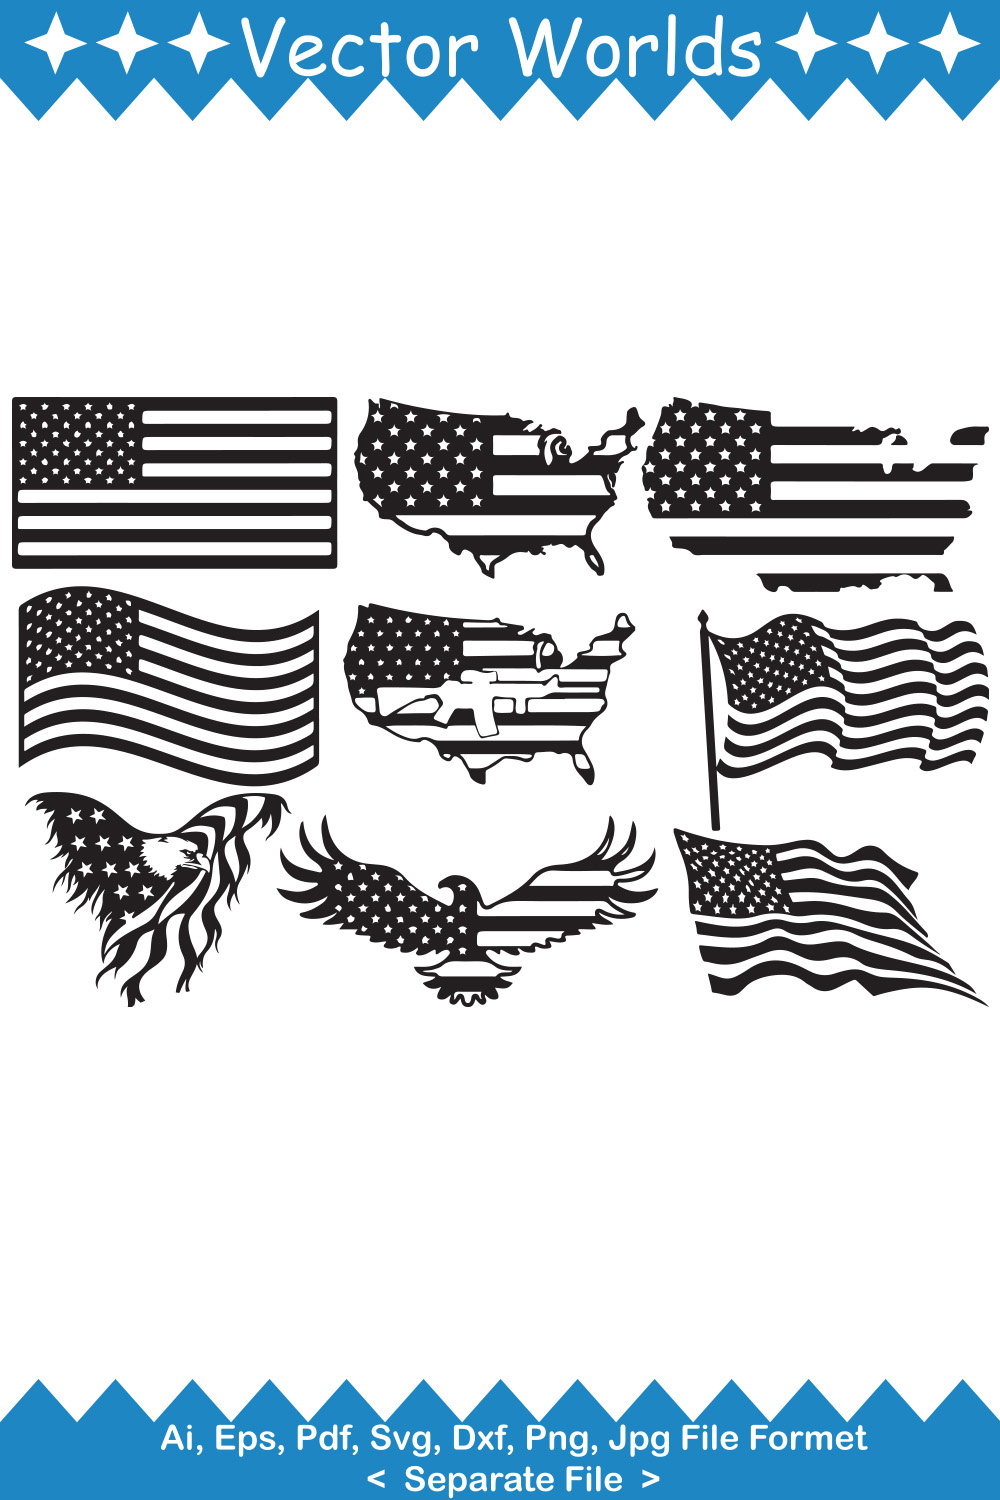 Pack of adorable america flag vector images.